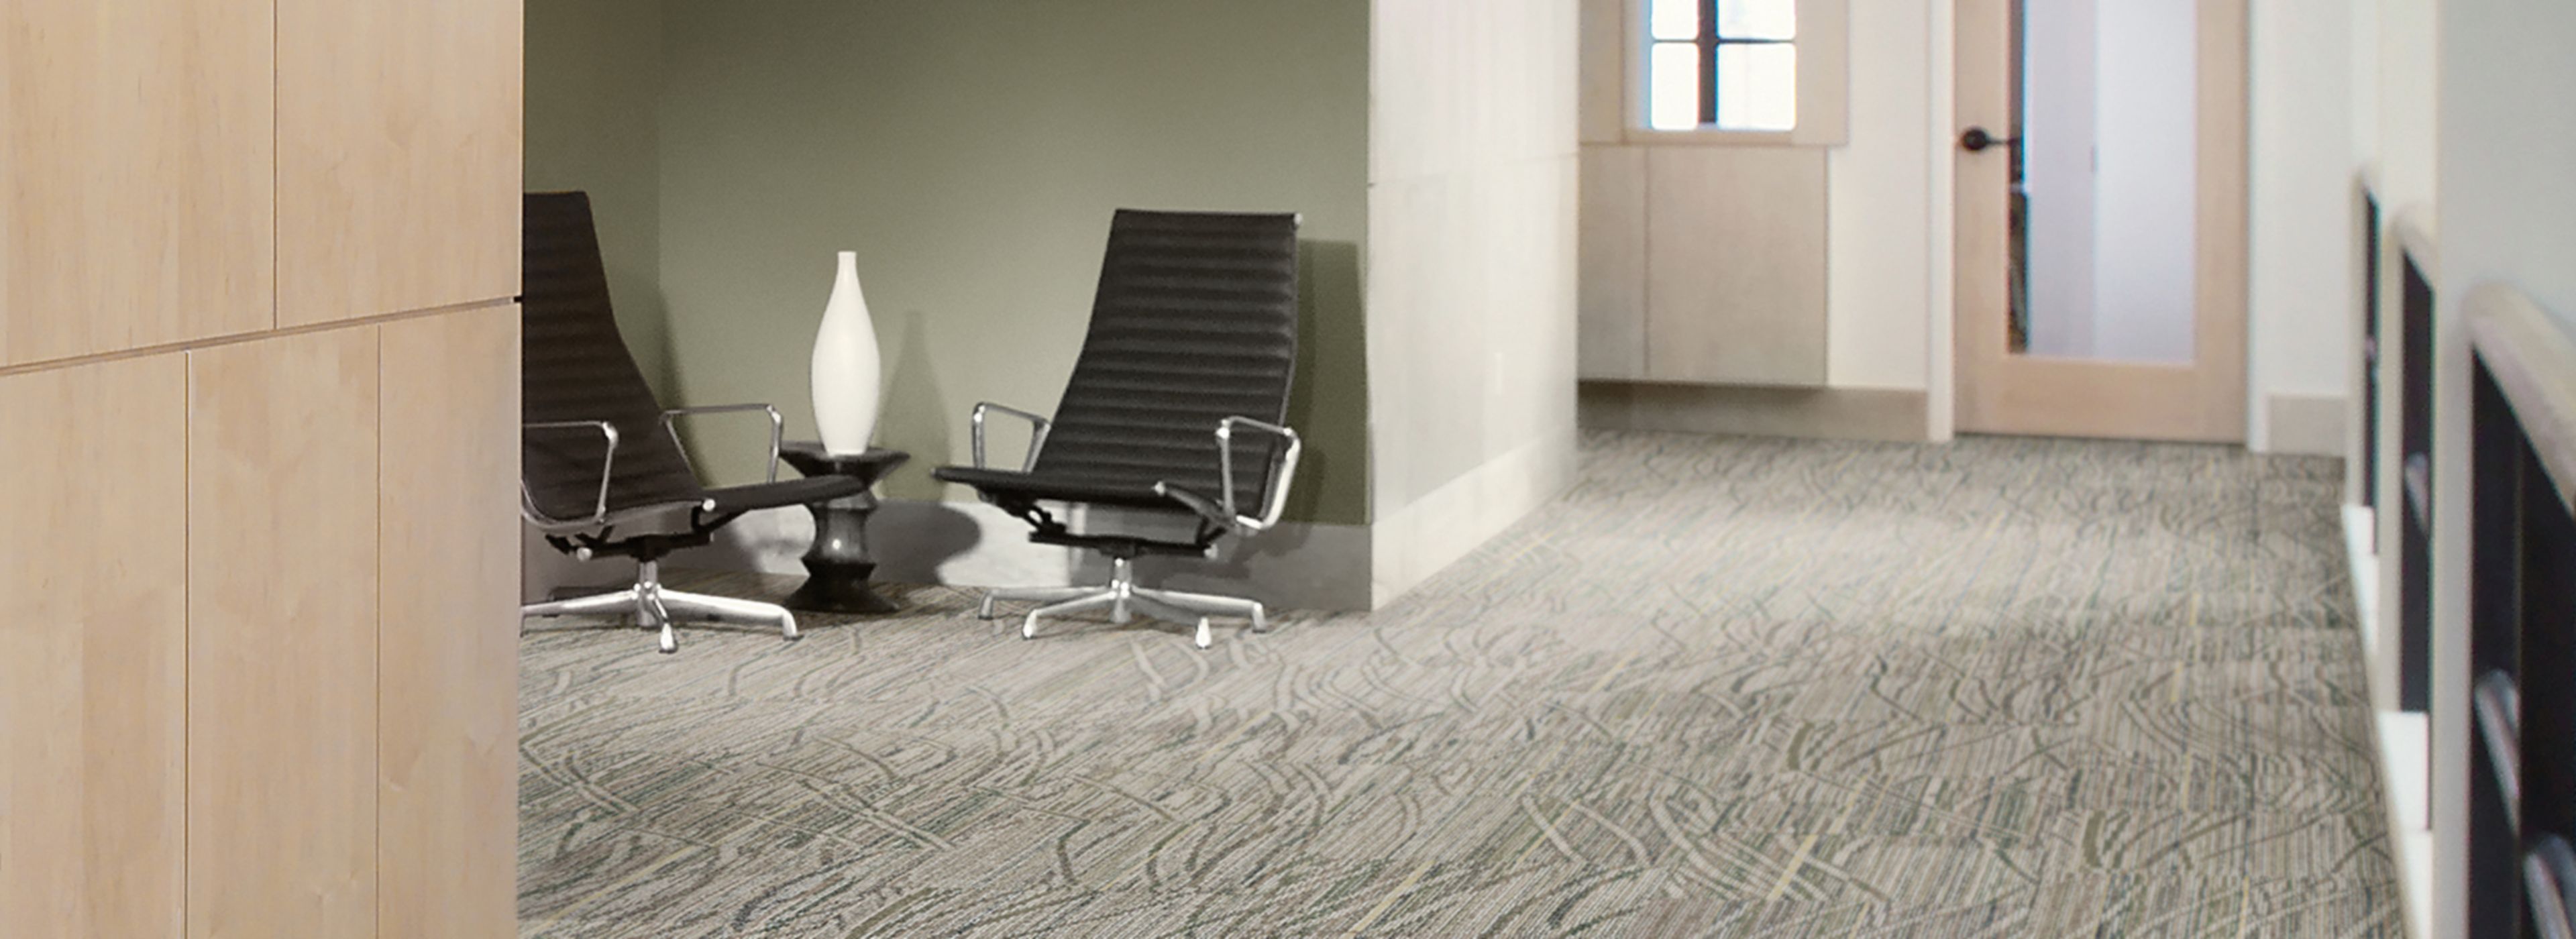 Interface Prairie Grass Loop carpet tile in corridor with seating area on side numéro d’image 1